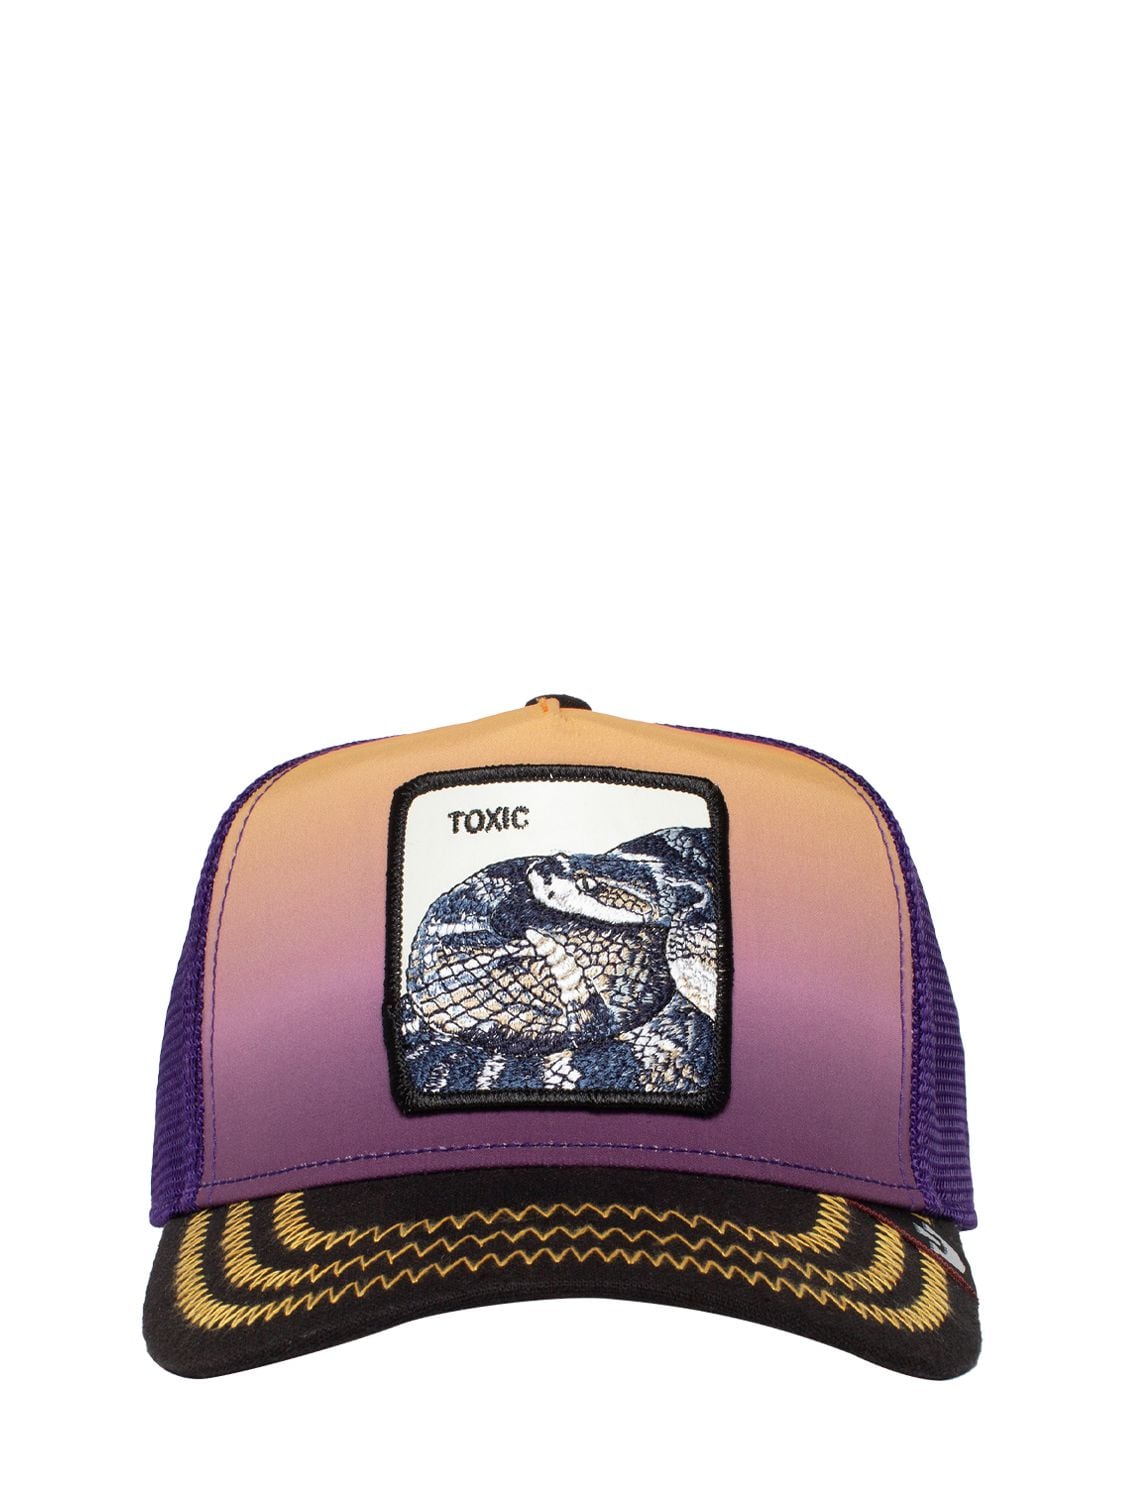 Image of Toxic Snake Trucker Hat W/patch